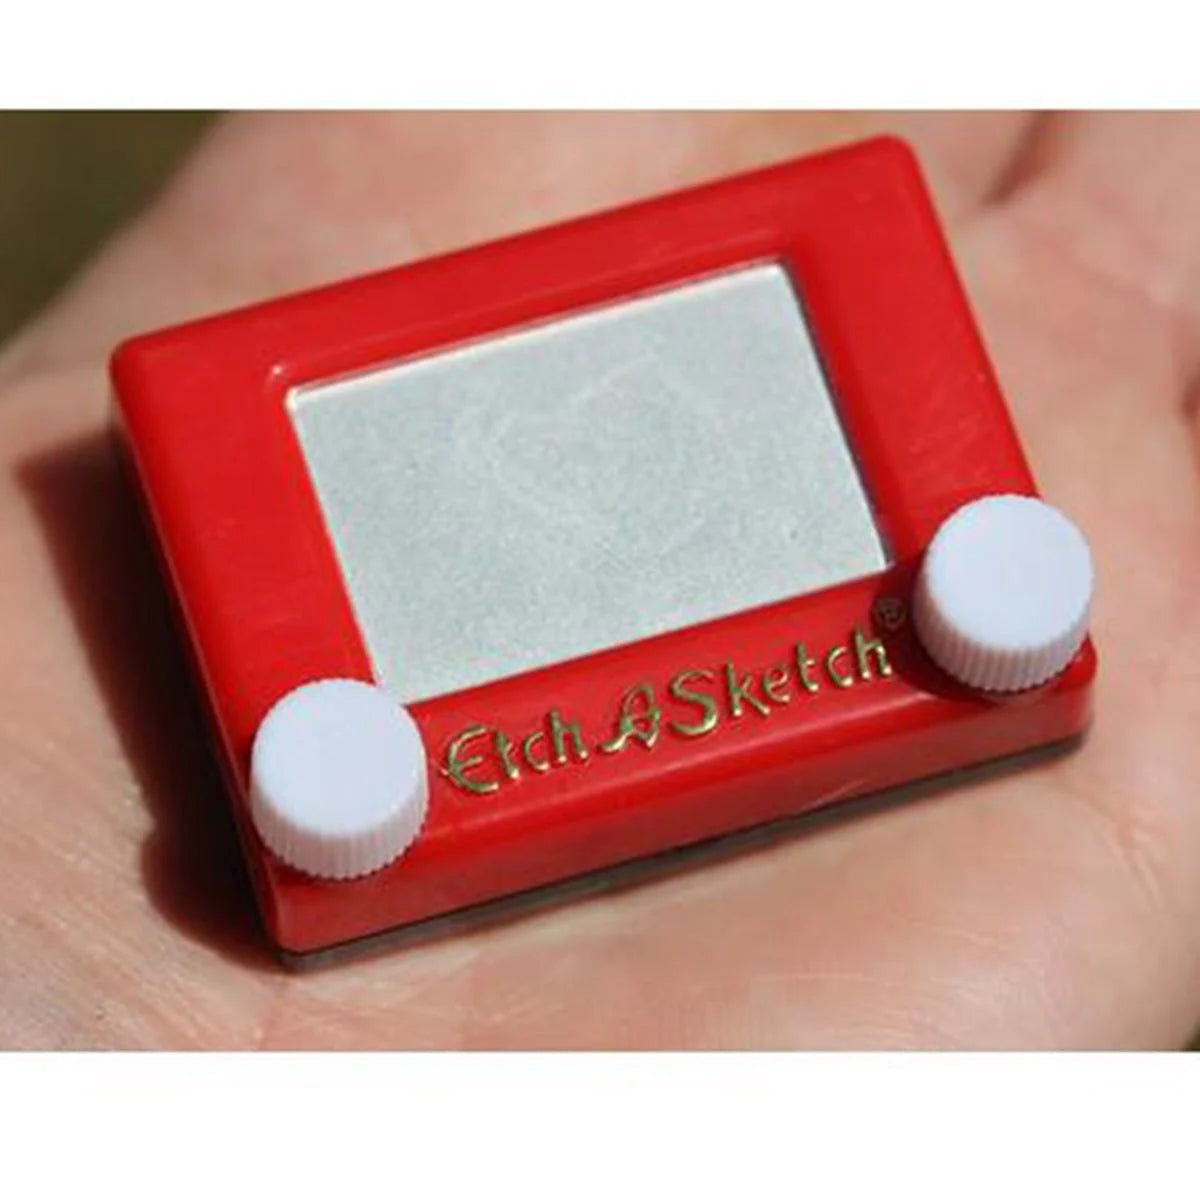 World's Smallest Etch a Sketch Drawing Pad Retro! - Simon's Collectibles